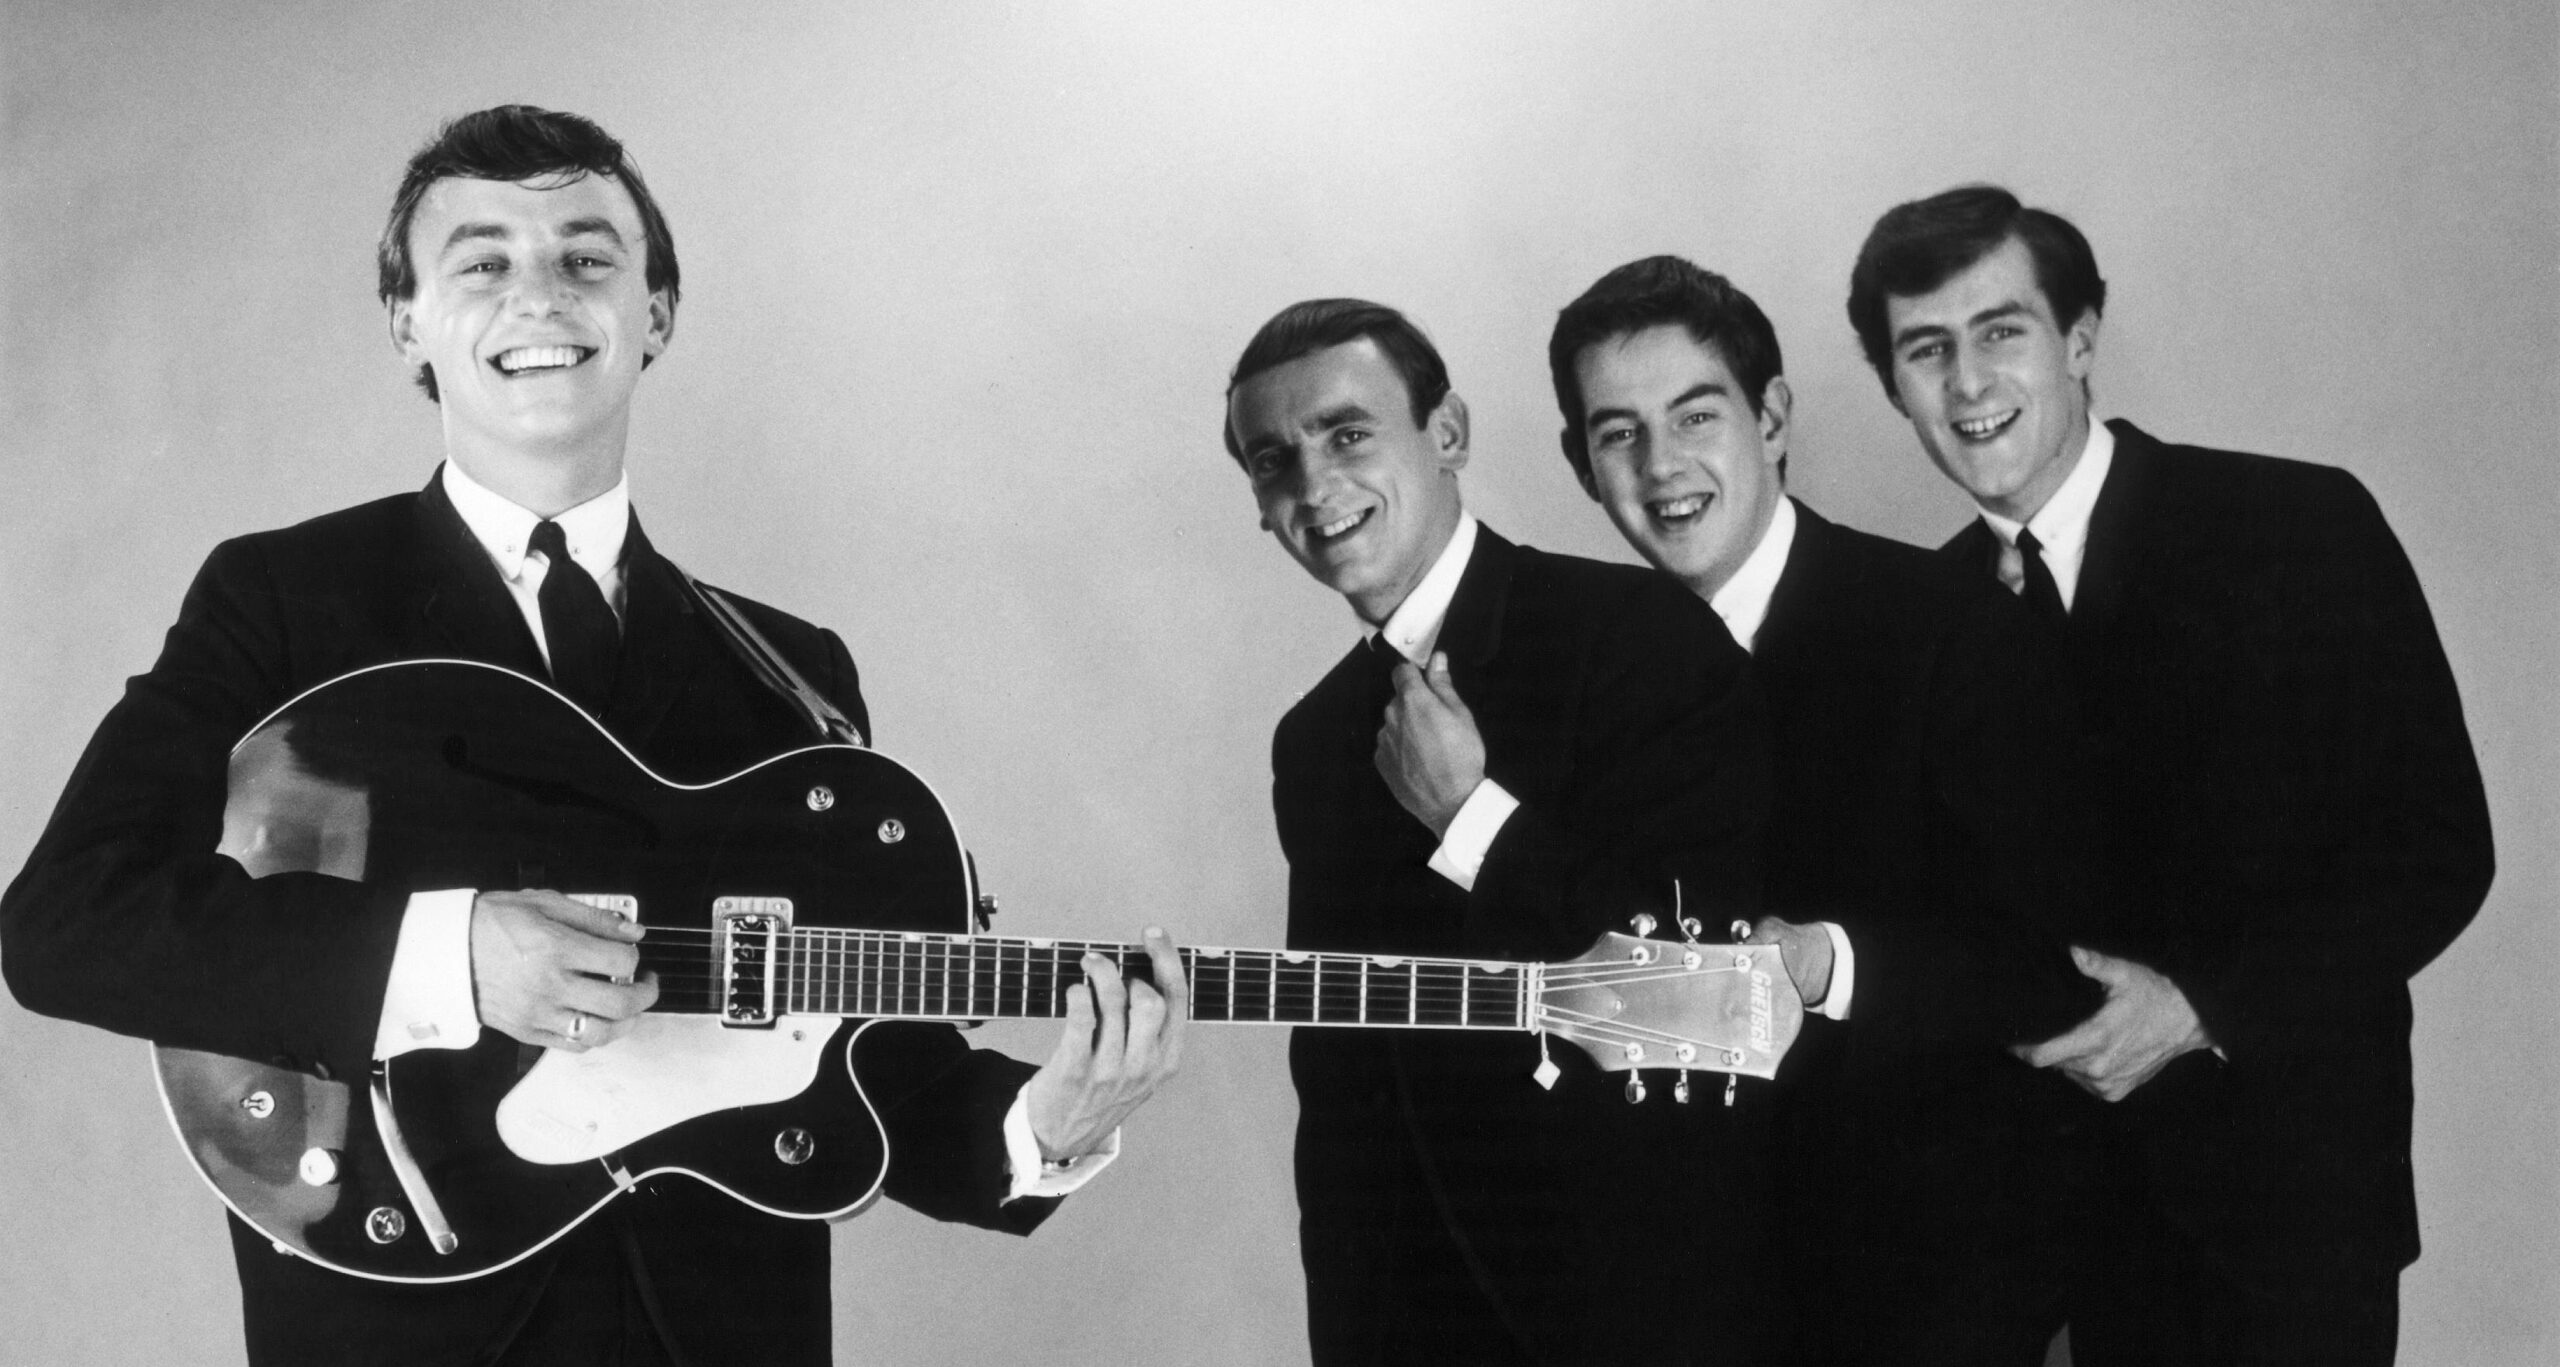 UNSPECIFIED - JANUARY 01:  Photo of Gerry MARSDEN and GERRY &amp; THE PACEMAKERS  (Photo by Gems/Redferns)